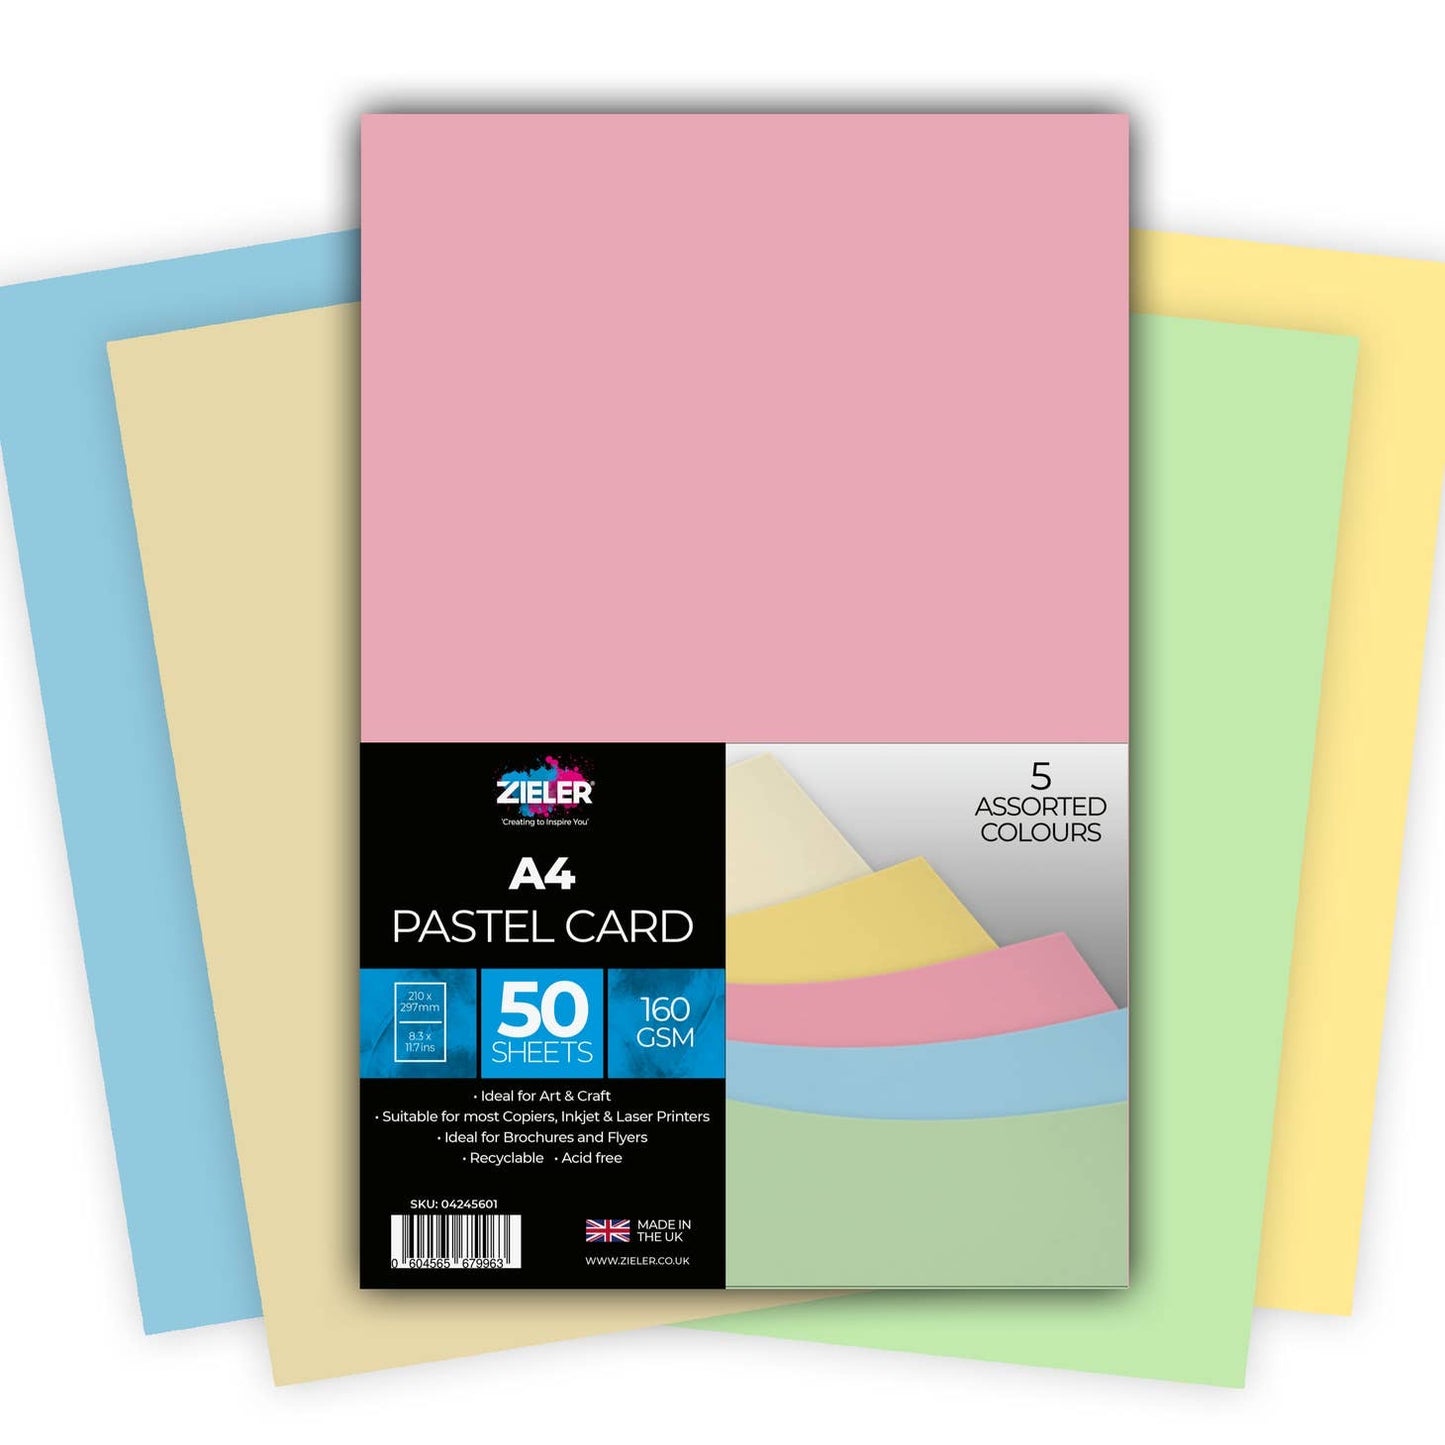 A4 Pastel Coloured Card 160gsm 50 sheets 5 Assorted Colours